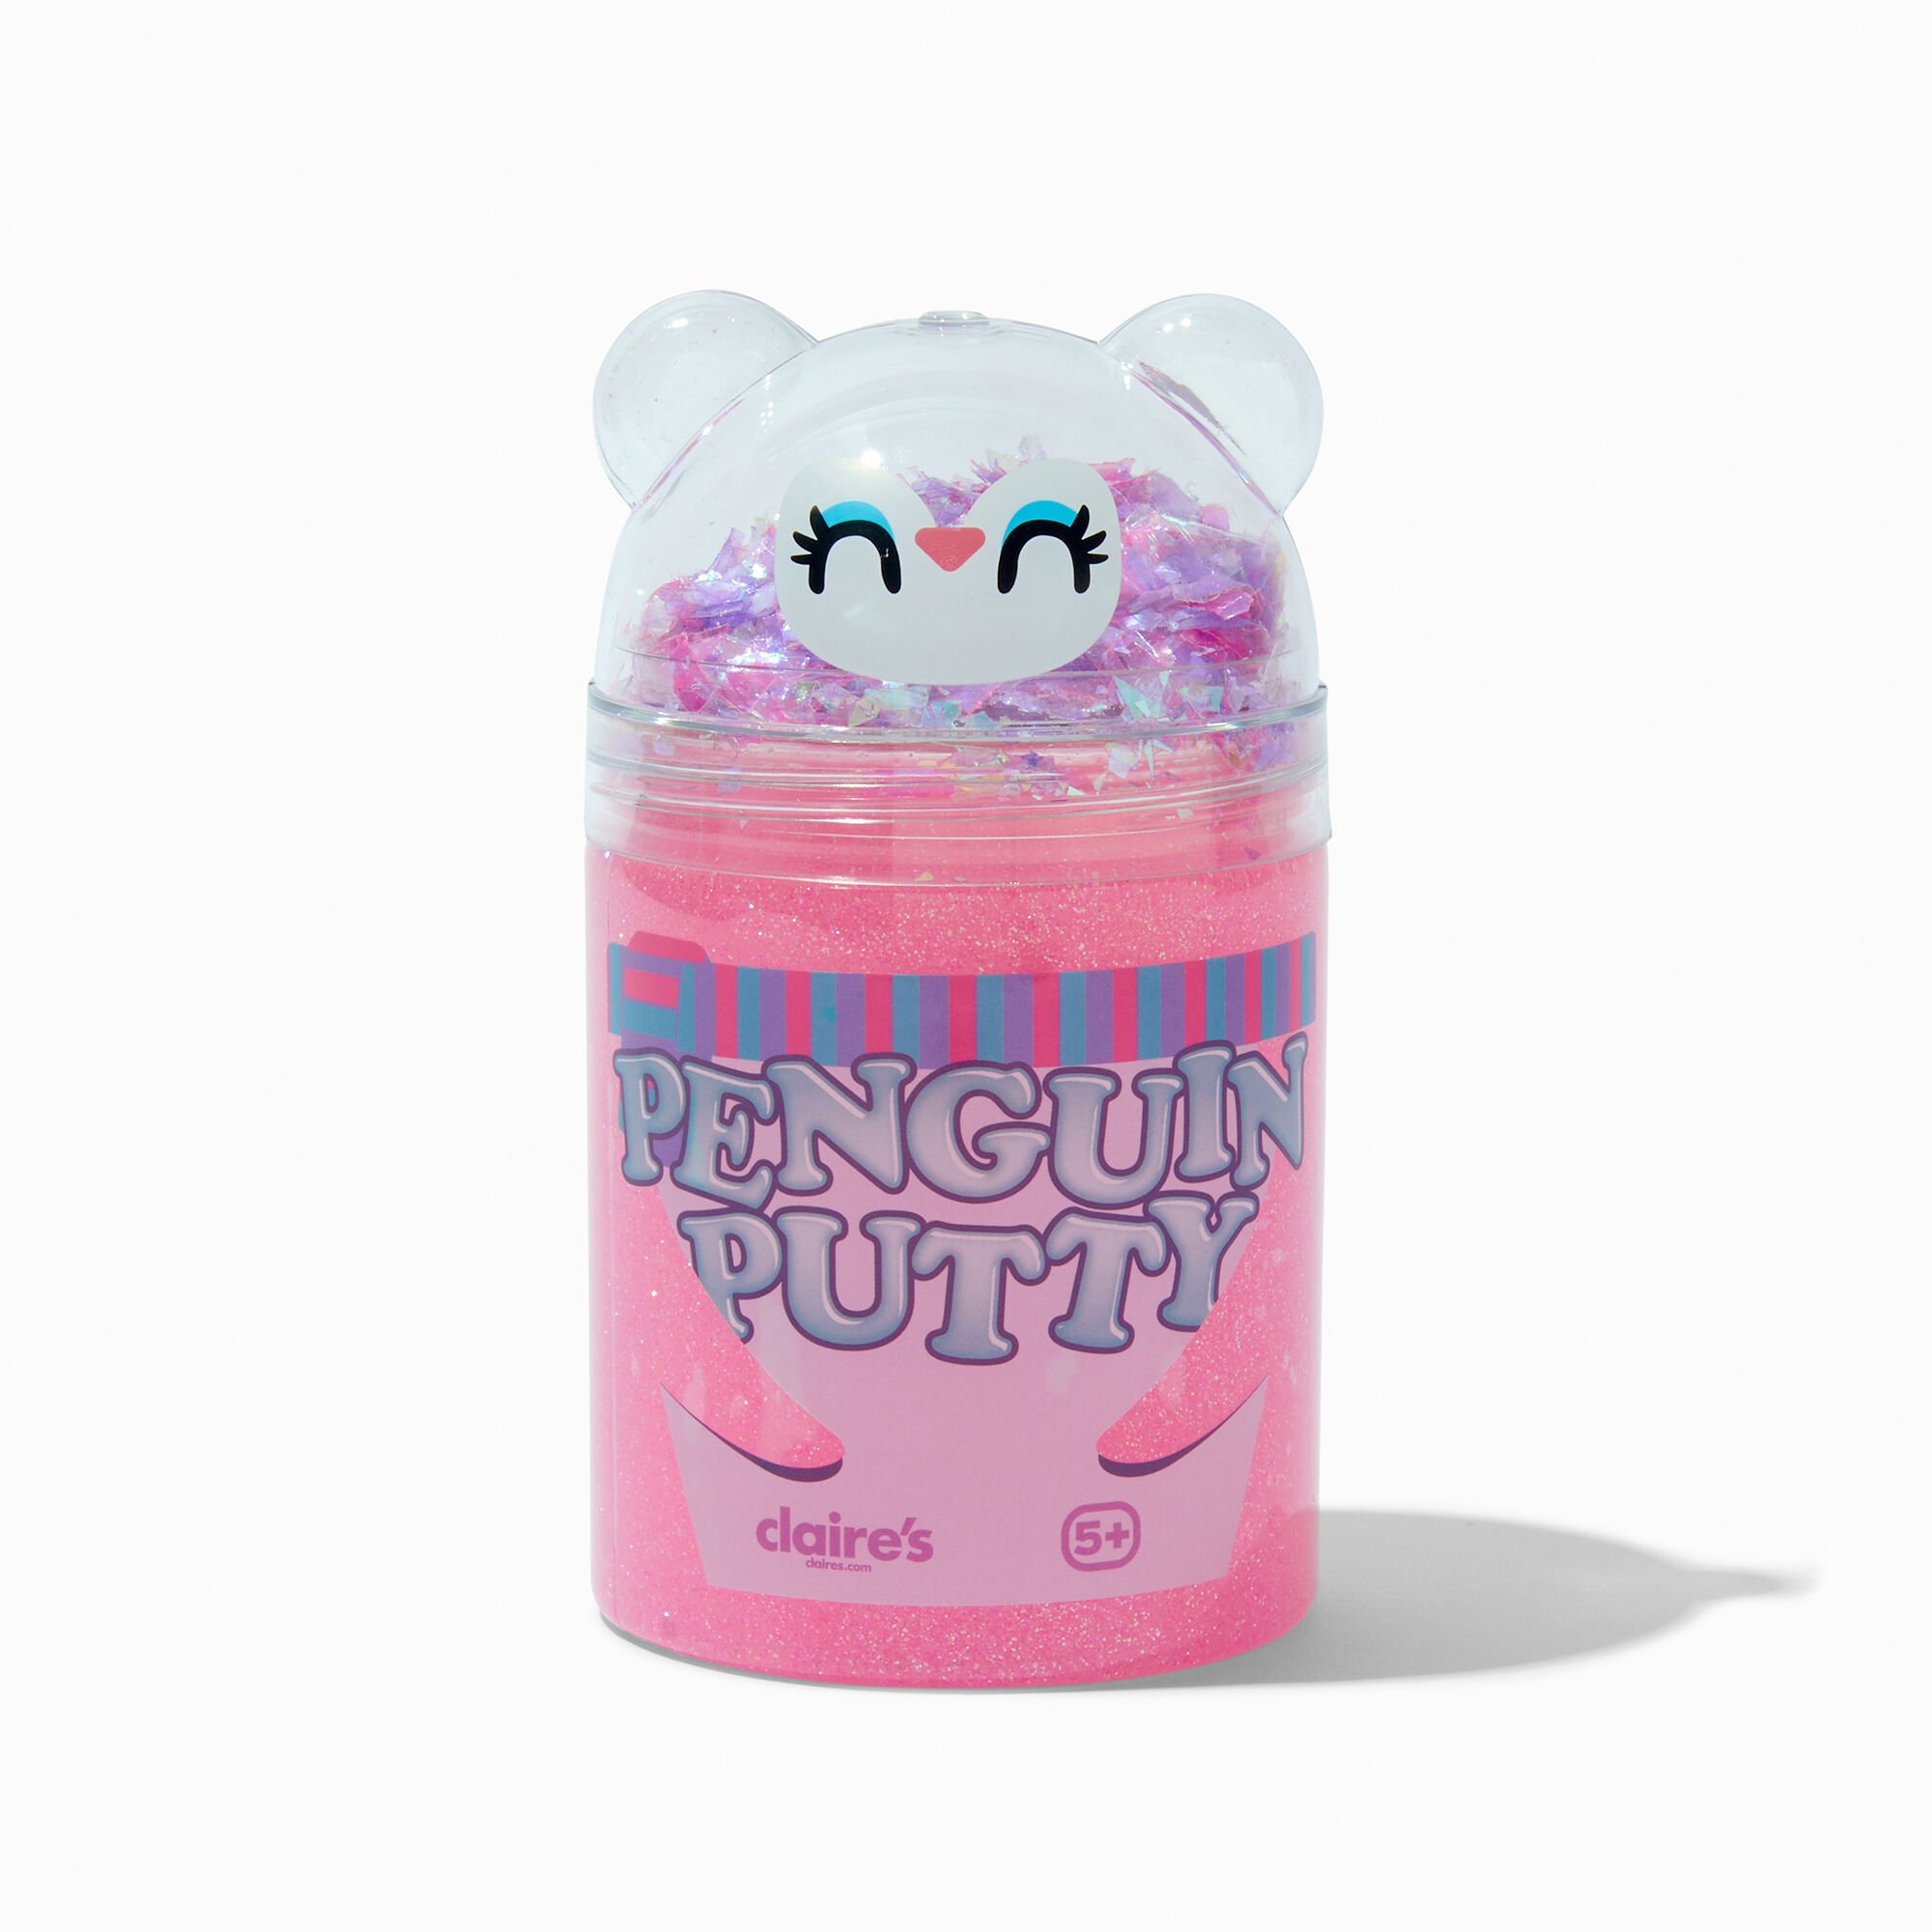 View Claires Penguin Putty Sparkle Slime Kit information